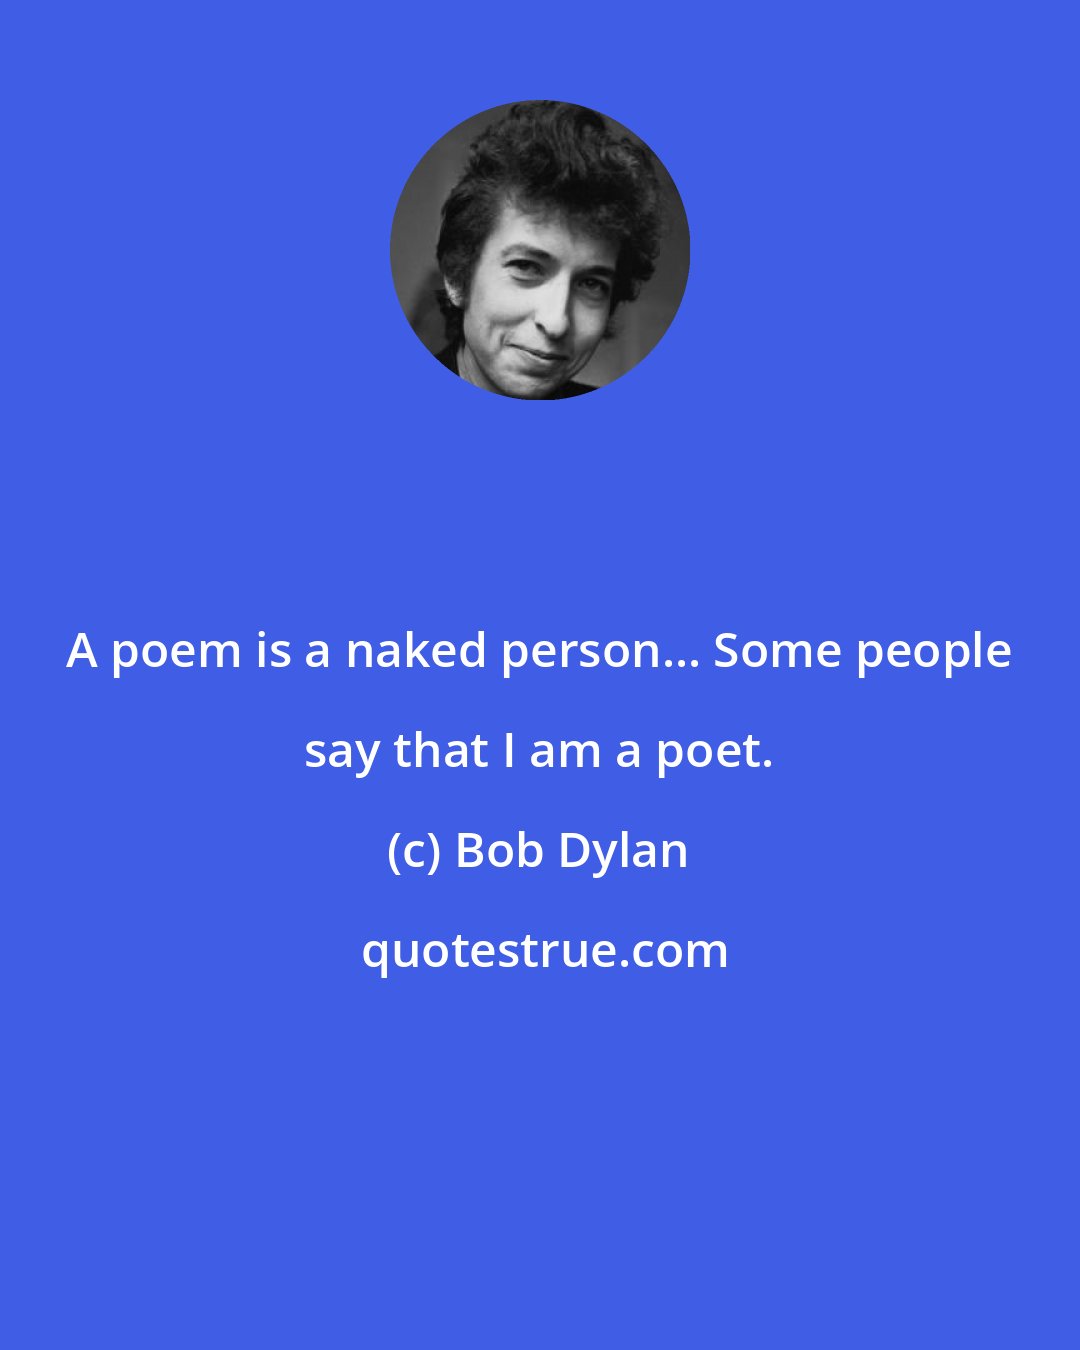 Bob Dylan: A poem is a naked person... Some people say that I am a poet.